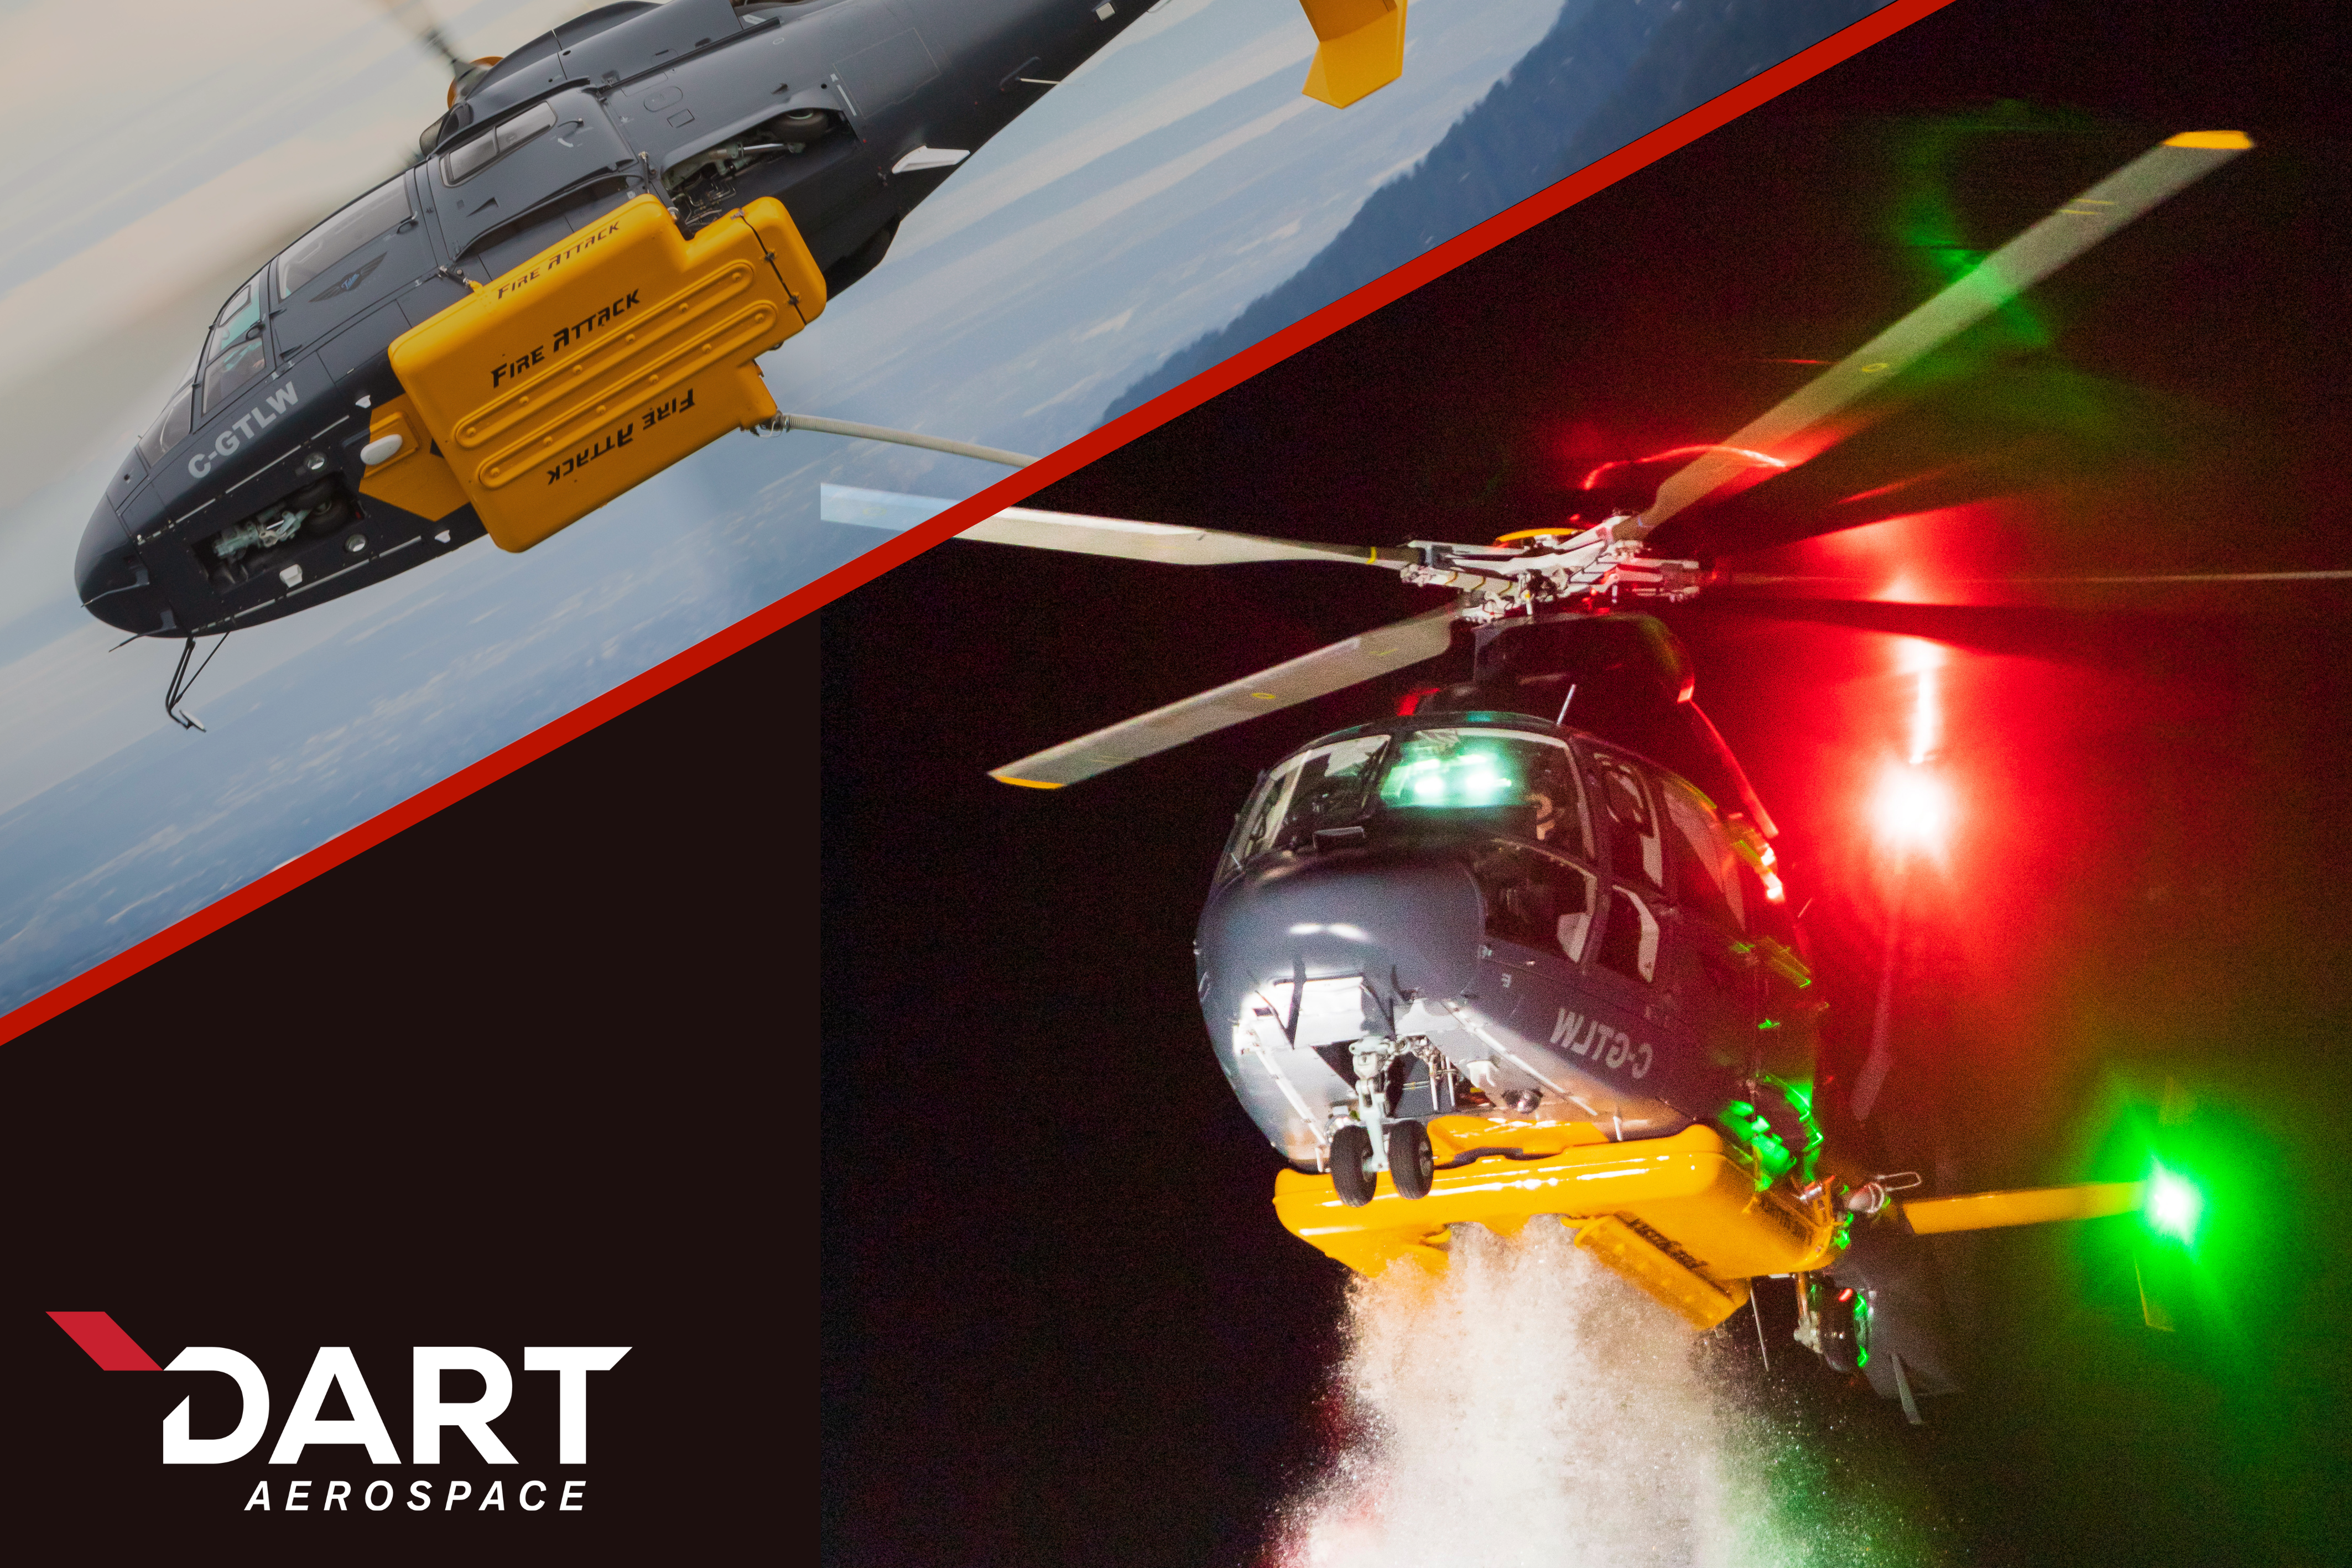 DART Aerospace receives Transport Canada Approval for Night Hover Refill Operations with Talon Helicopters’ AS365 Fire Attack System